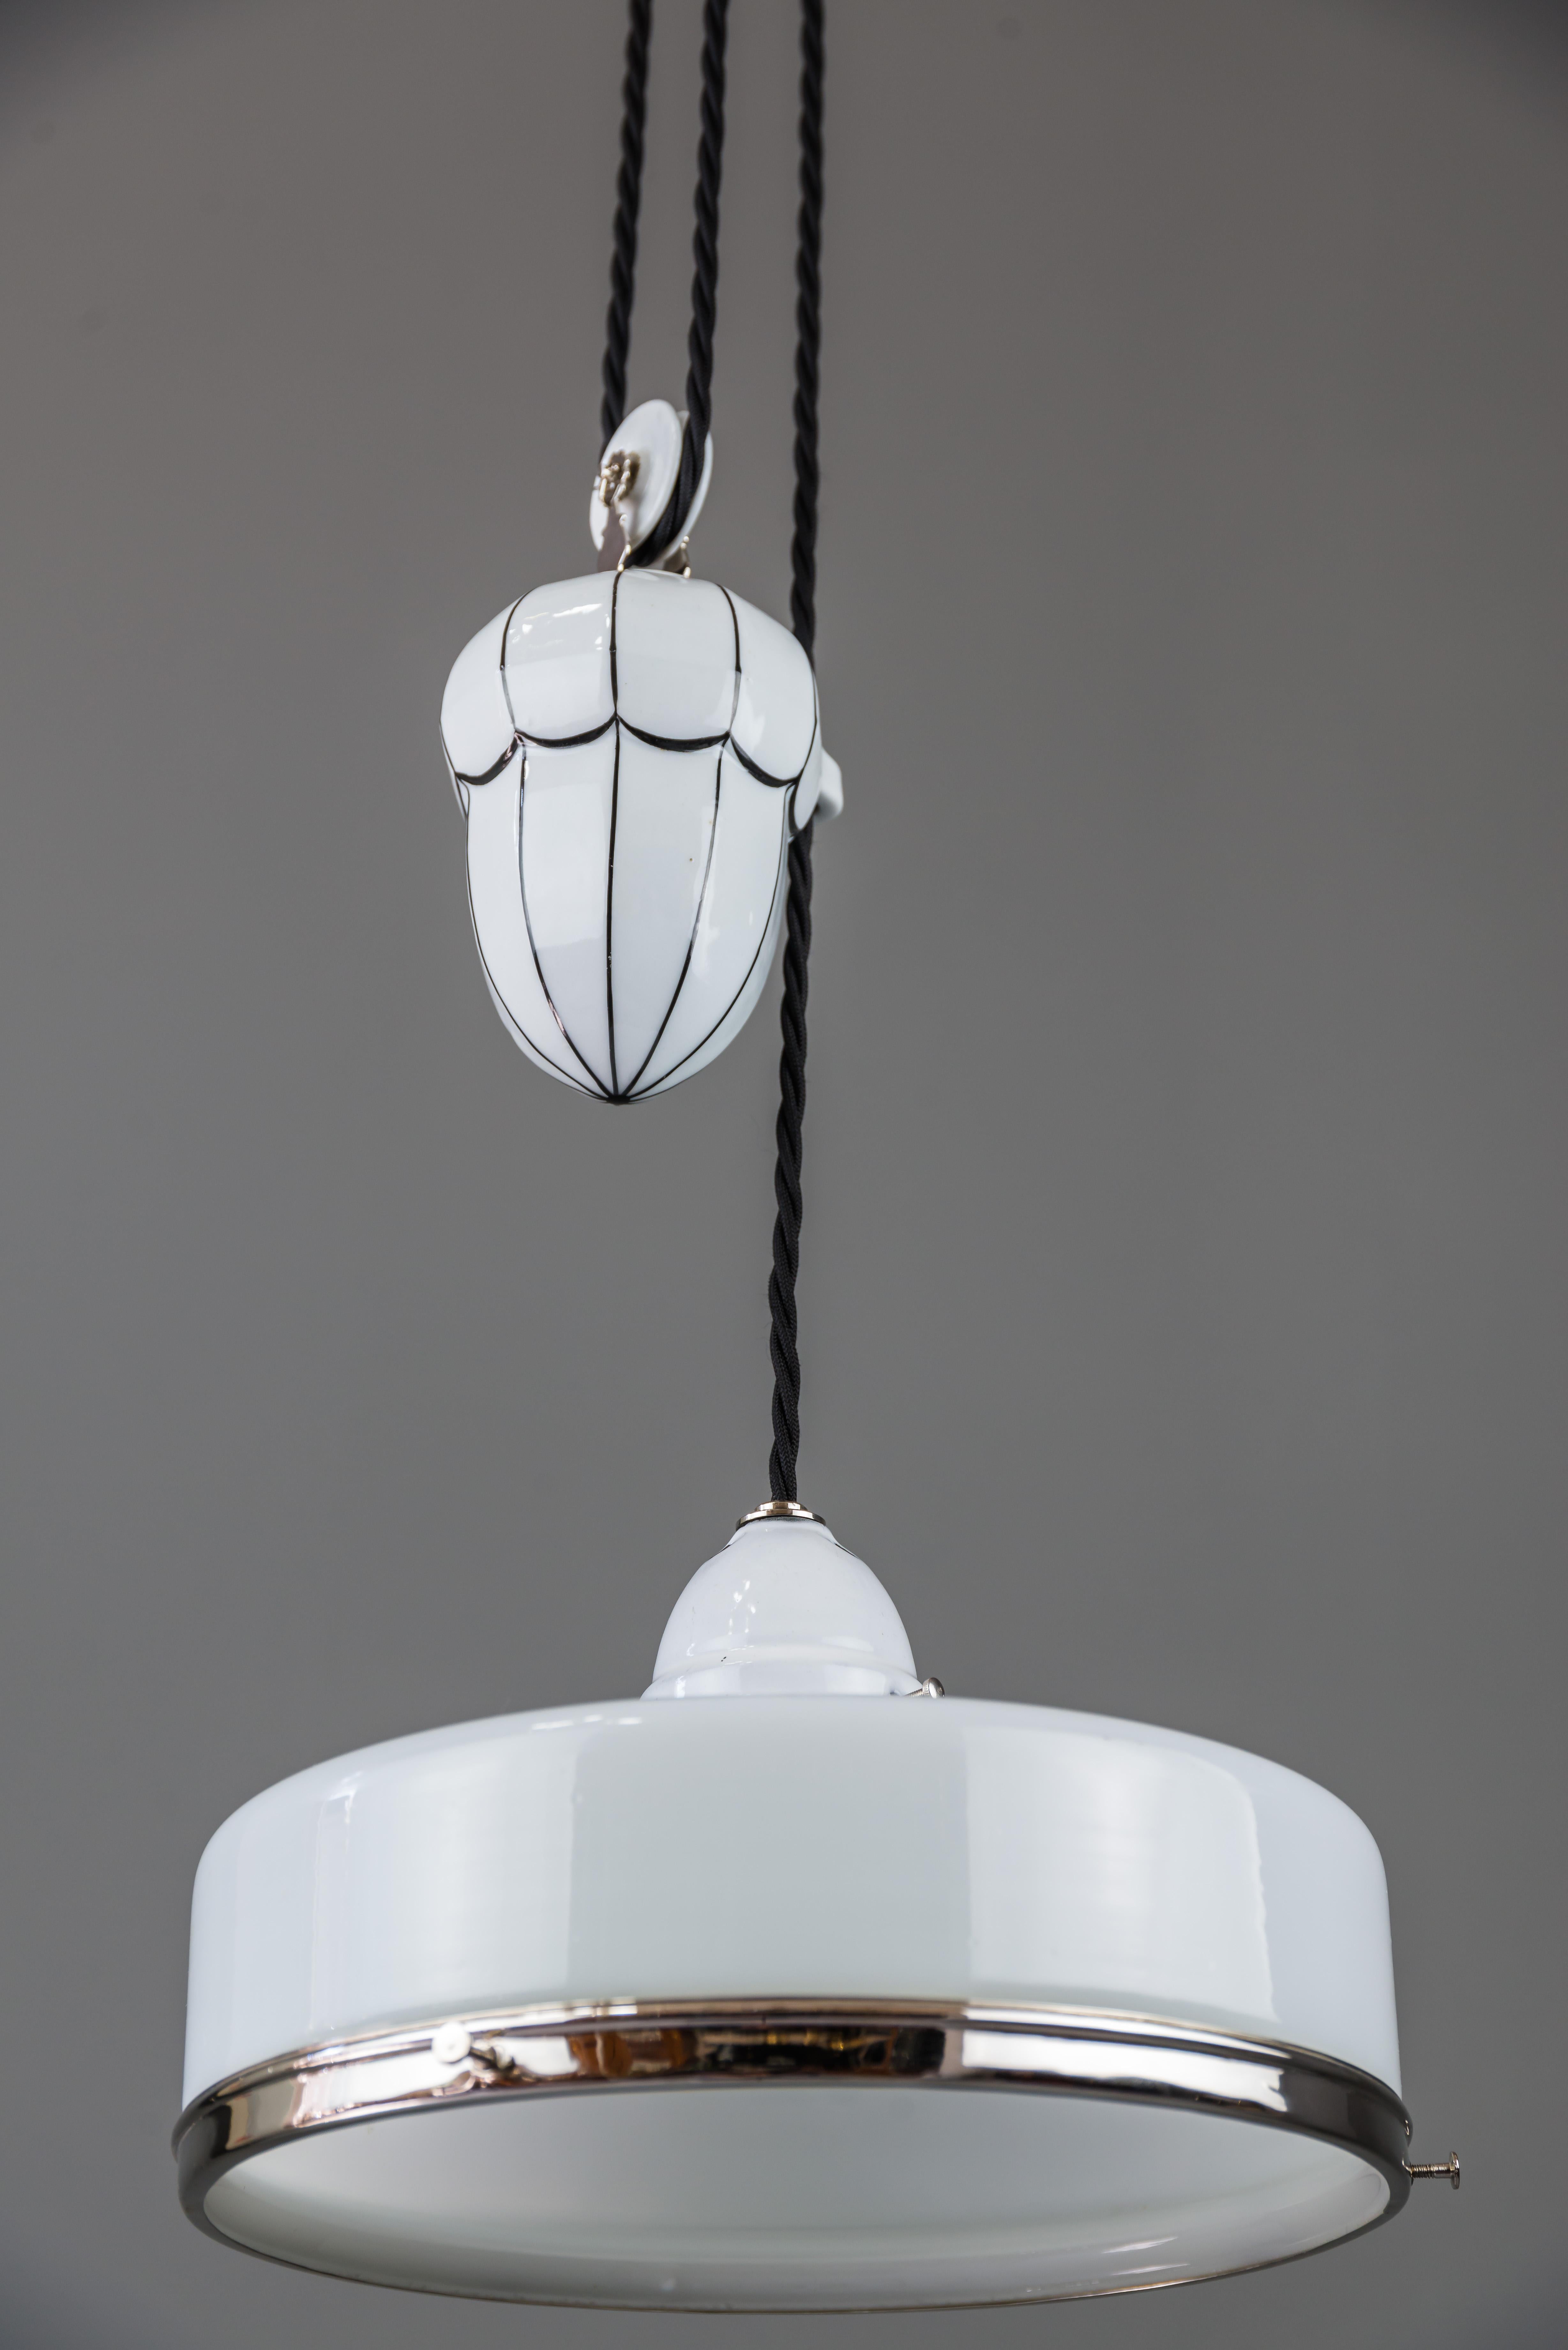 Bauhaus adjustable porcelain chandelier with original shade, circa 1920s.
Partly nickel-plated.
White porcelain with black stripes.
Normal high: 90cm extendable up to 174cm.